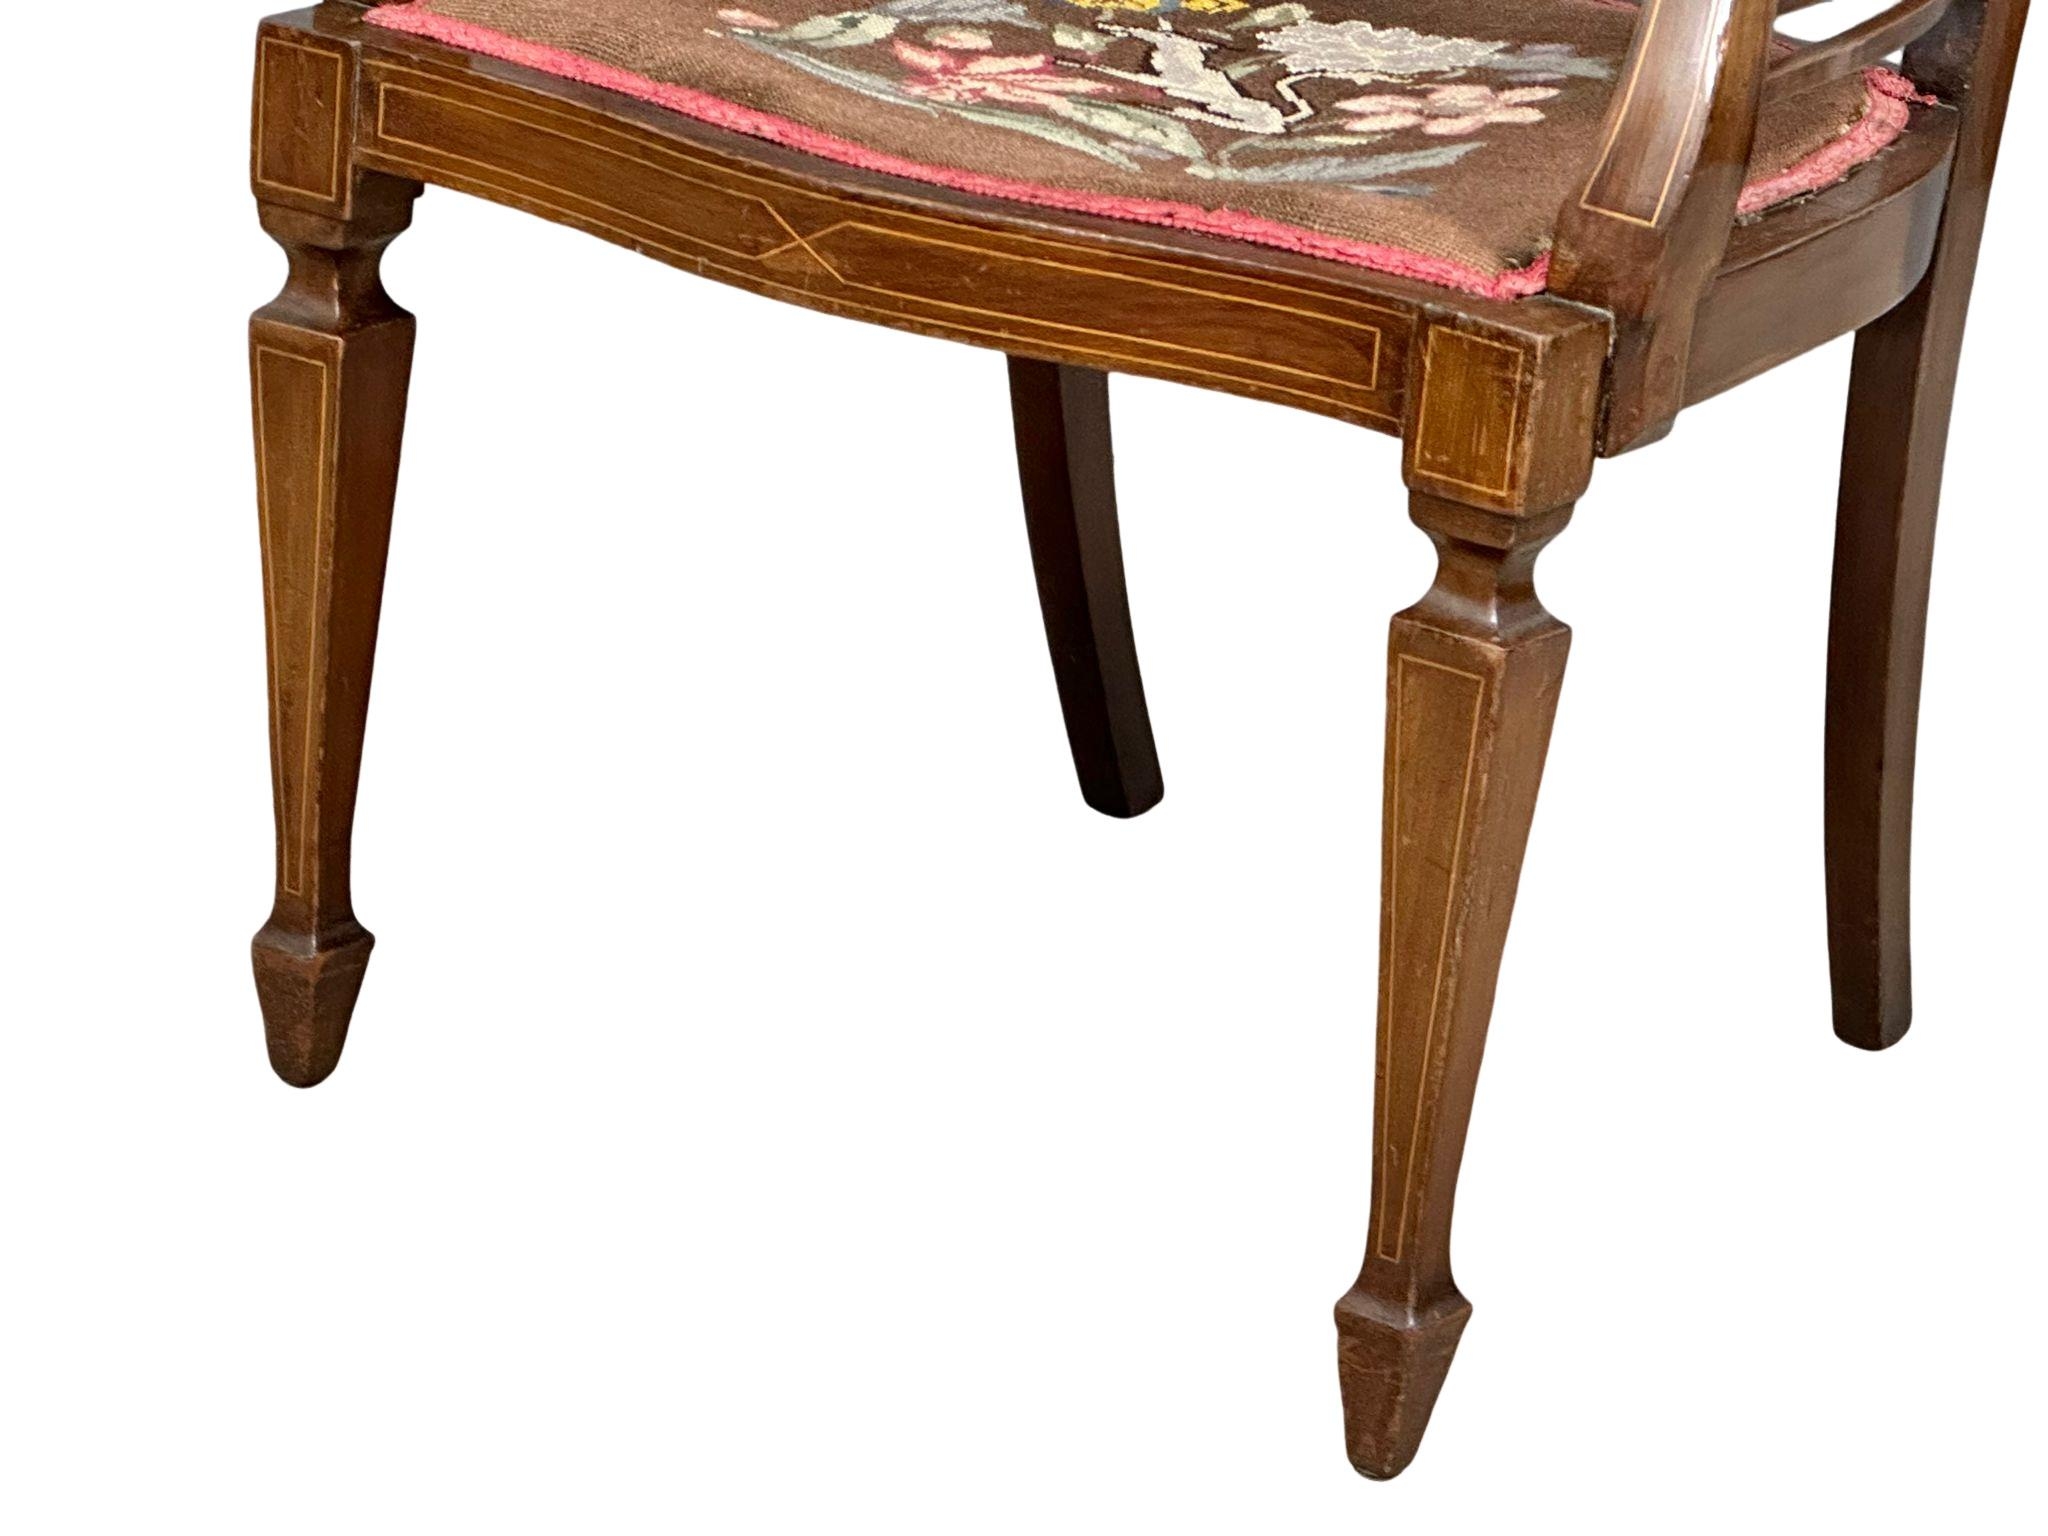 An Edwardian inlaid mahogany armchair with tapestry seat. 59x53x100cm(3) - Image 4 of 5